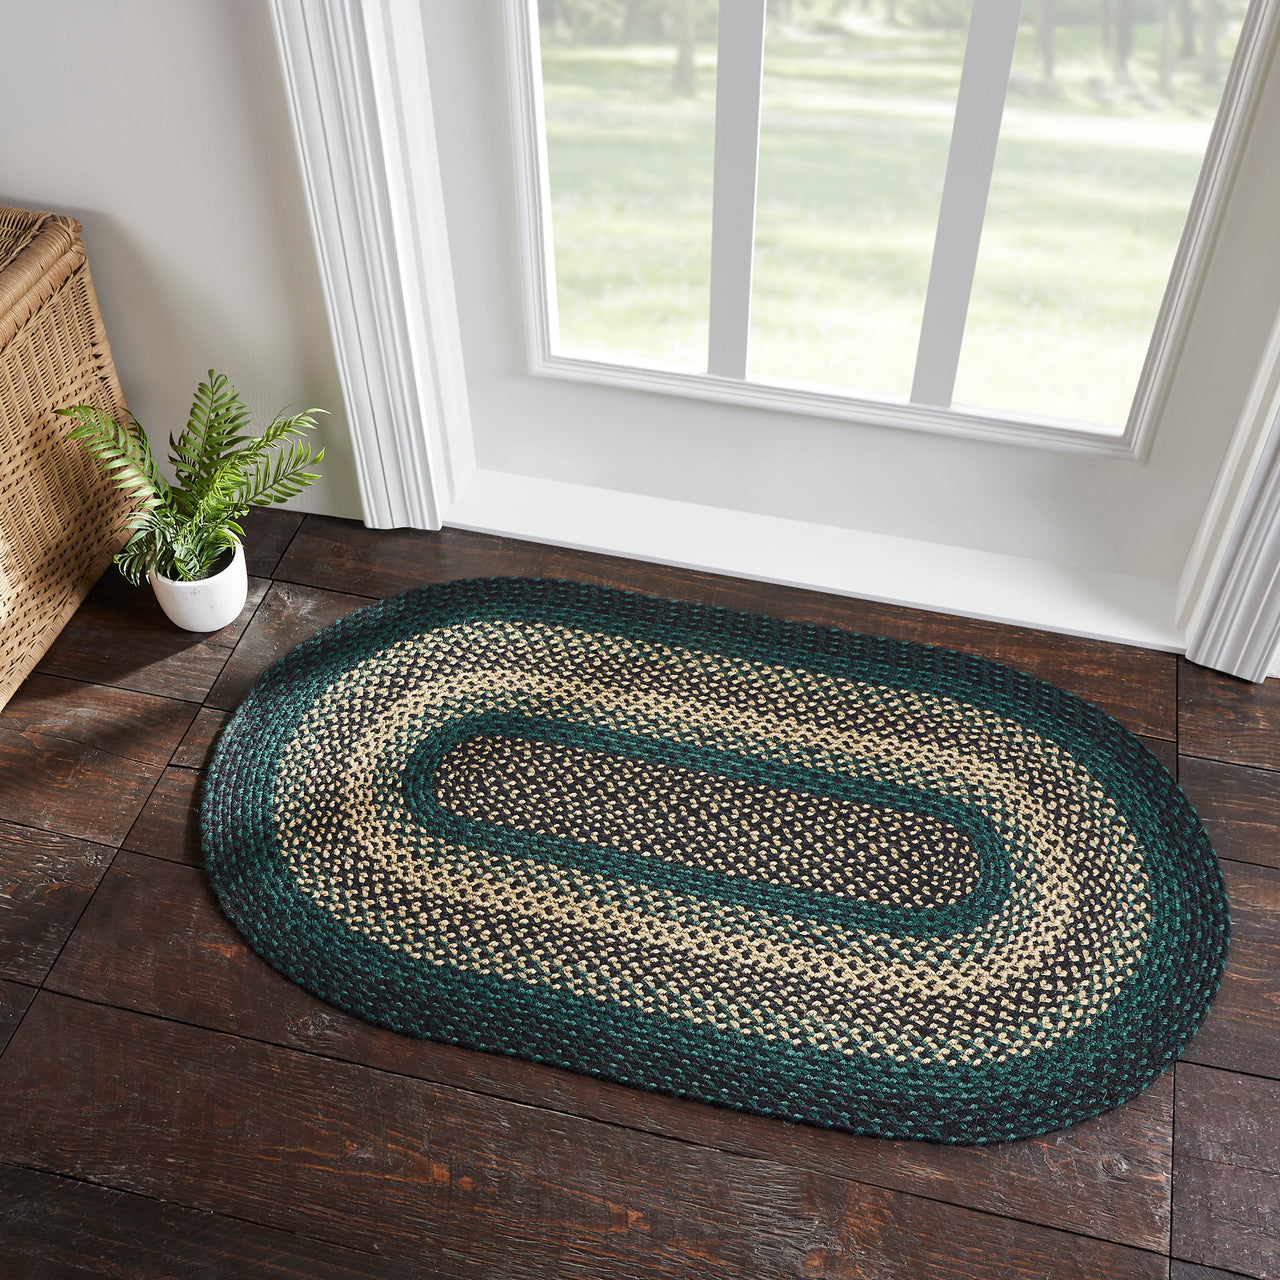 Pine Grove Jute Braided Rug Oval with Rug Pad 27"x48" VHC Brands